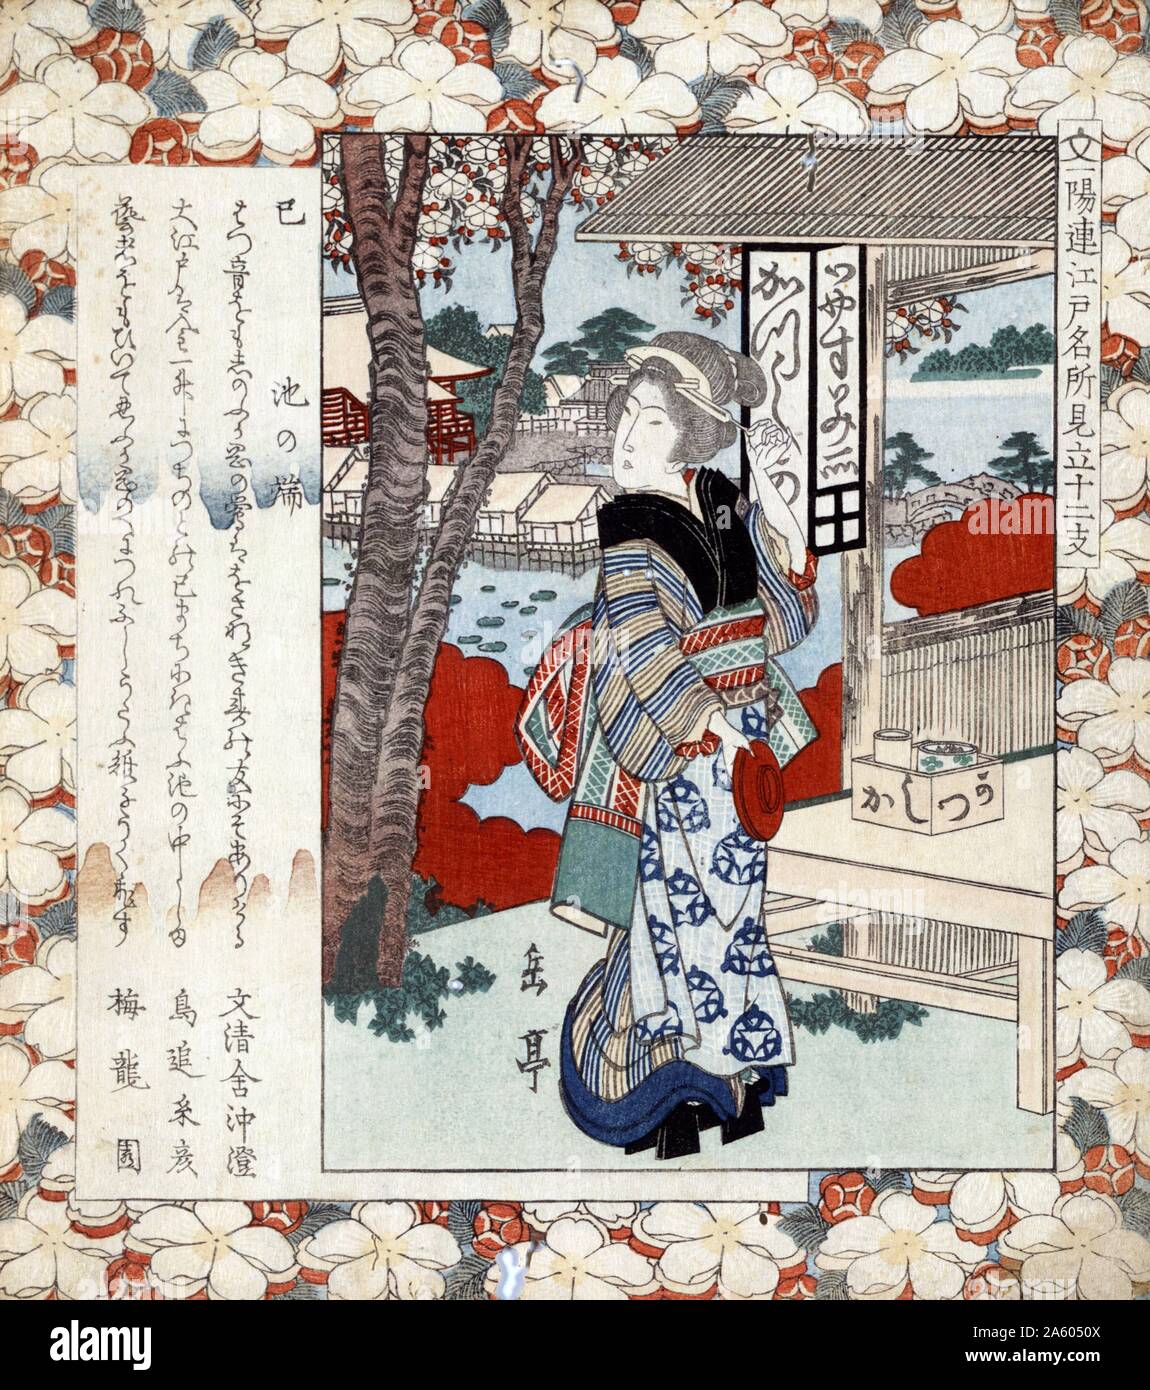 Mi ikenohata: Year of the snake: Ikenohada. by Gogaku Yajima; 19th century; artist [between 1818 and 1830]. Print shows a woman; full-length portrait; standing outside a building; wearing kimono and geta; with view of village connected by a bridge in the background; page patterned with blossoms. Stock Photo